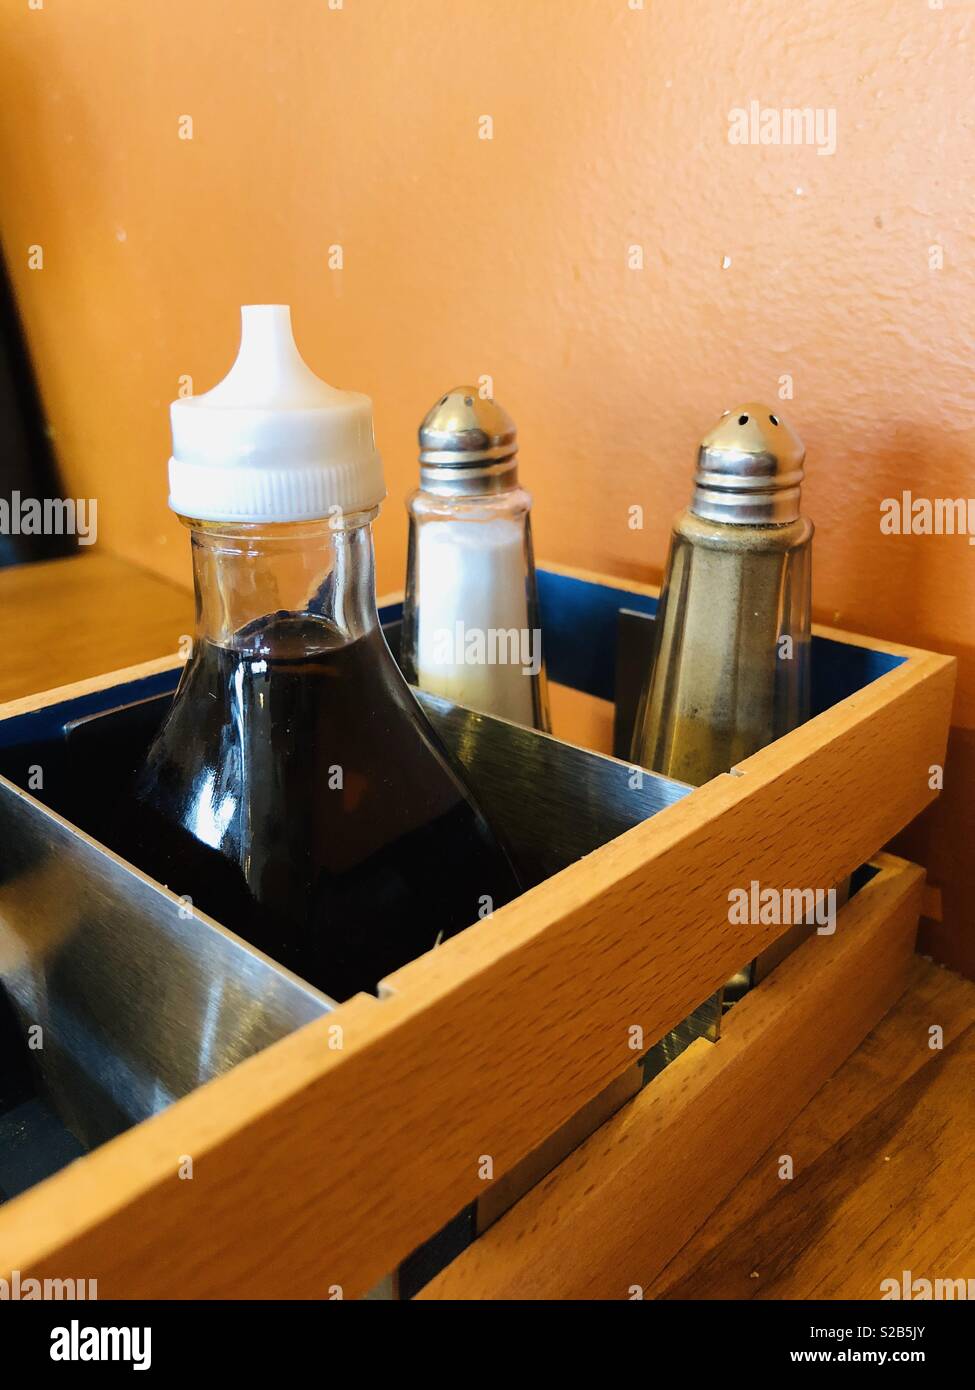 Salt, pepper and vinegar - condiments in an English café with orange painted background Stock Photo